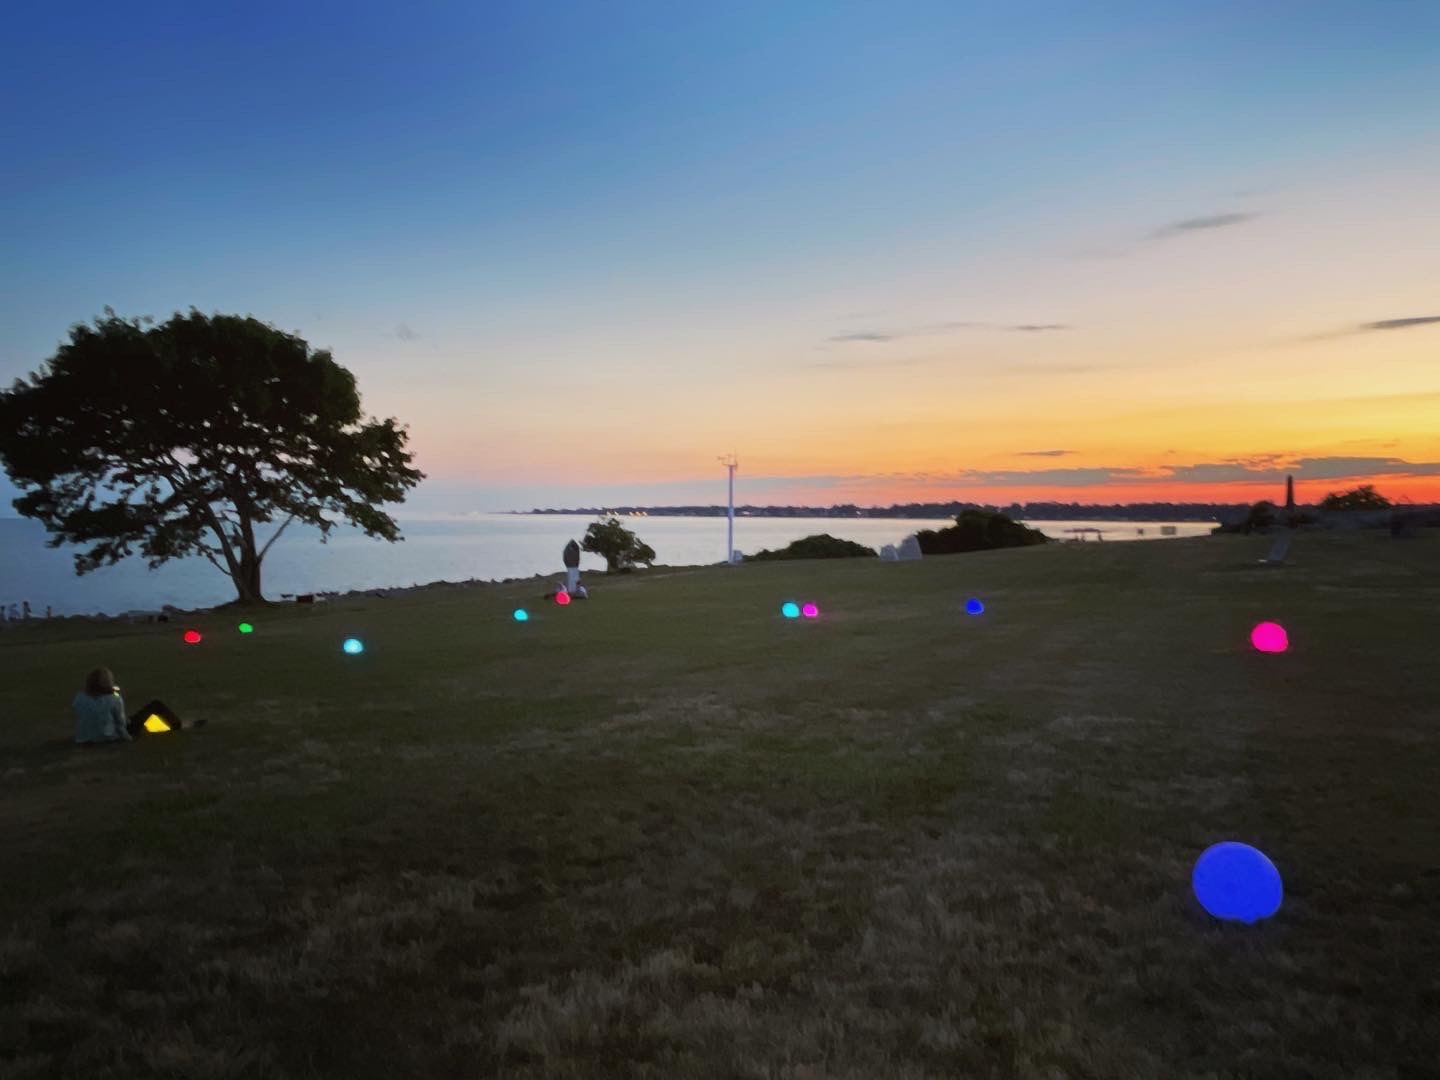 Beth Reitmeyer, Meditative Walk and For There Will Always Be Light, 2022, mixed media, Open Air, 2022, UConn Avery Point, 2022